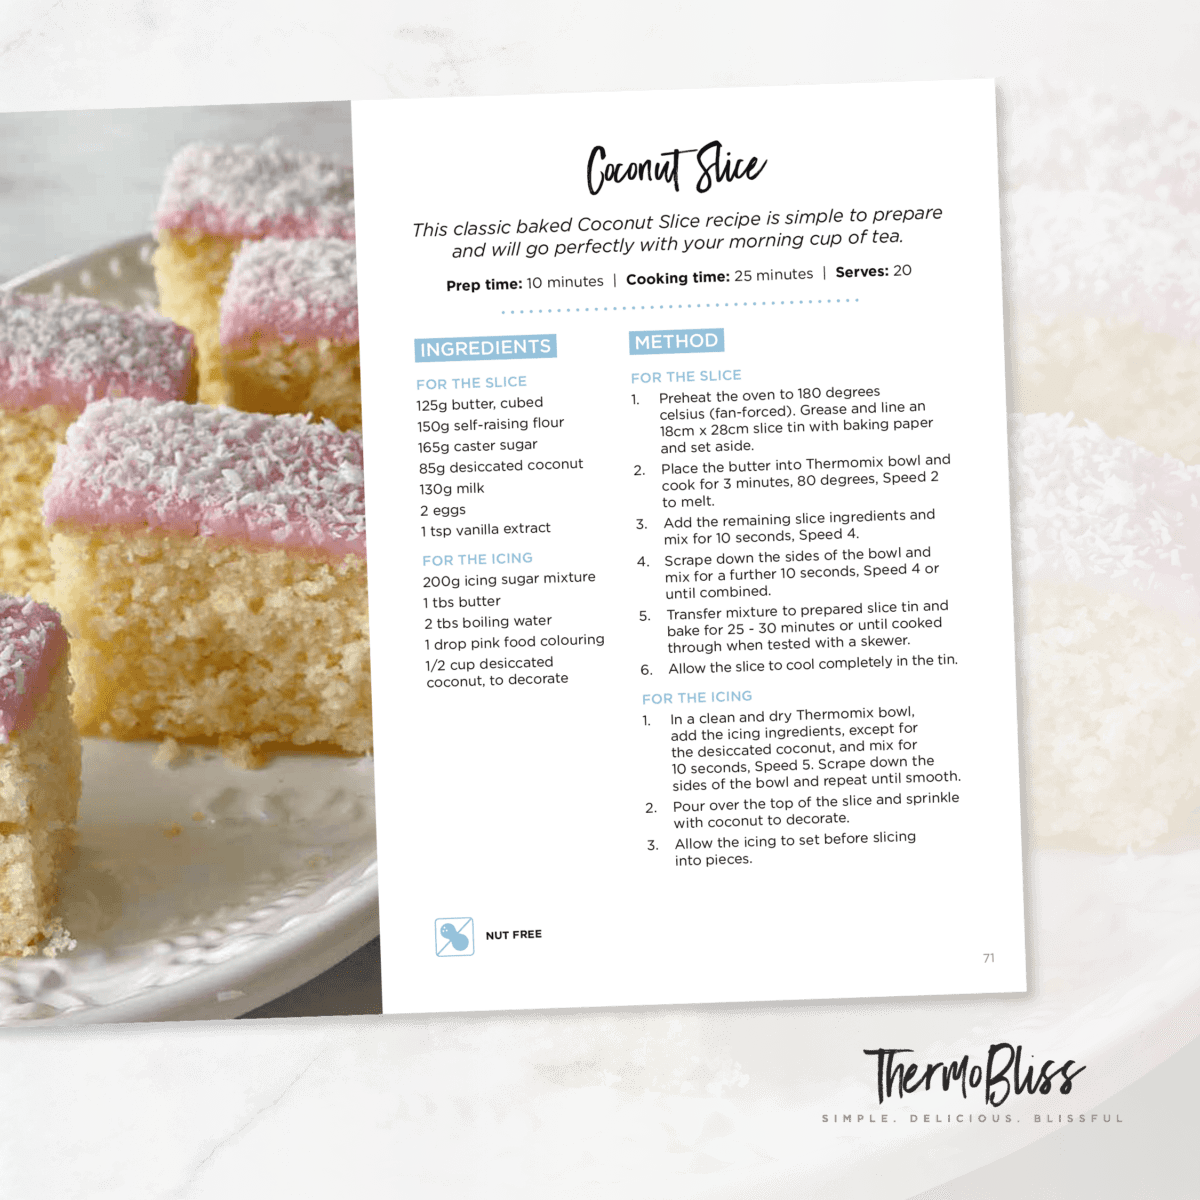 Image of Coconut Slice recipe fromThermomix Cookies & Slices Cookbook.